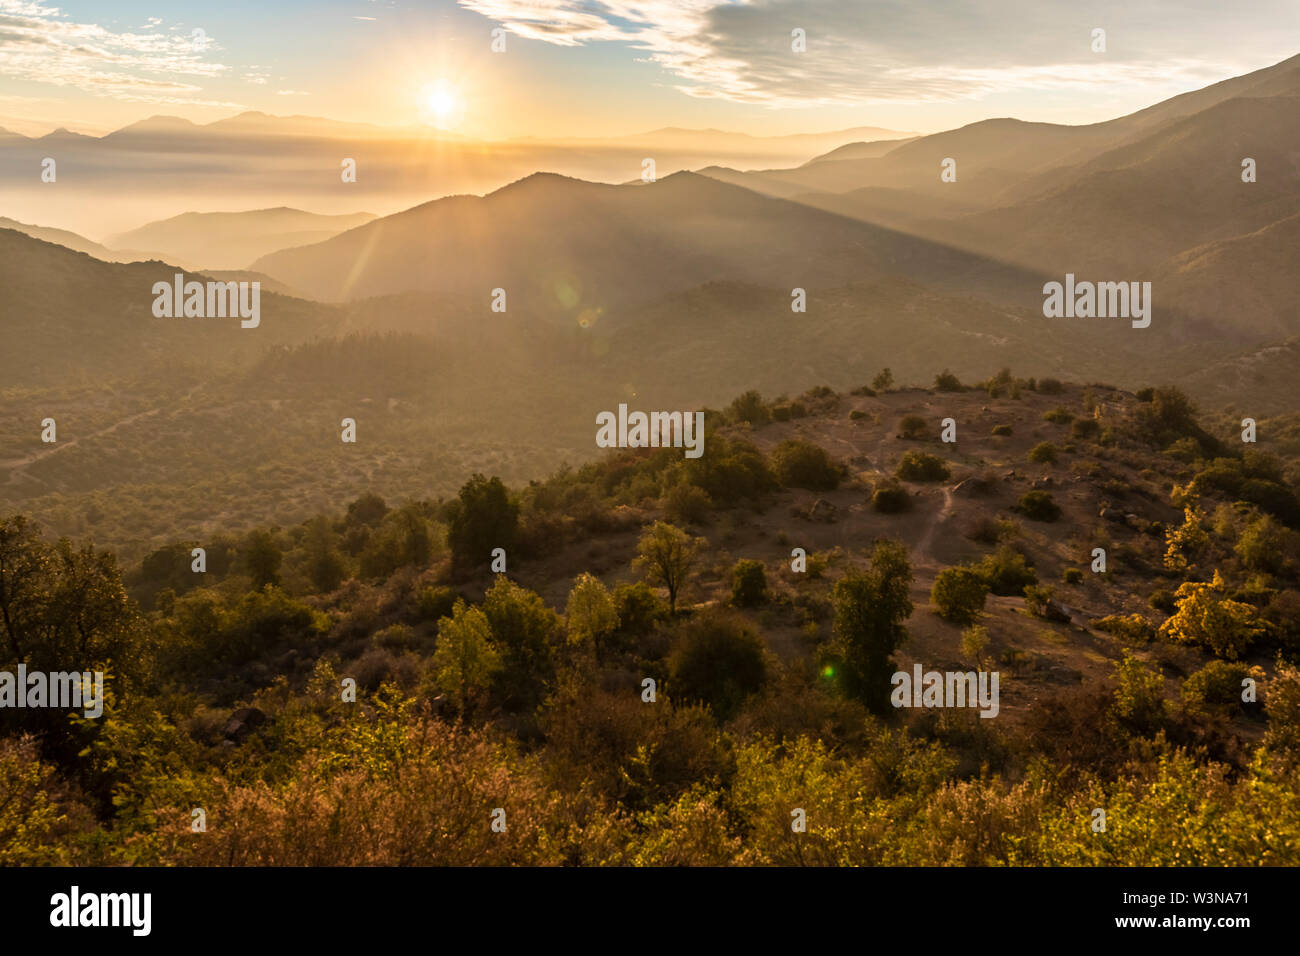 Central Andes valleys sunset view, an idyllic light illuminating the valley slopes full of trees and grass. A rugged landscape on a wild environment i Stock Photo